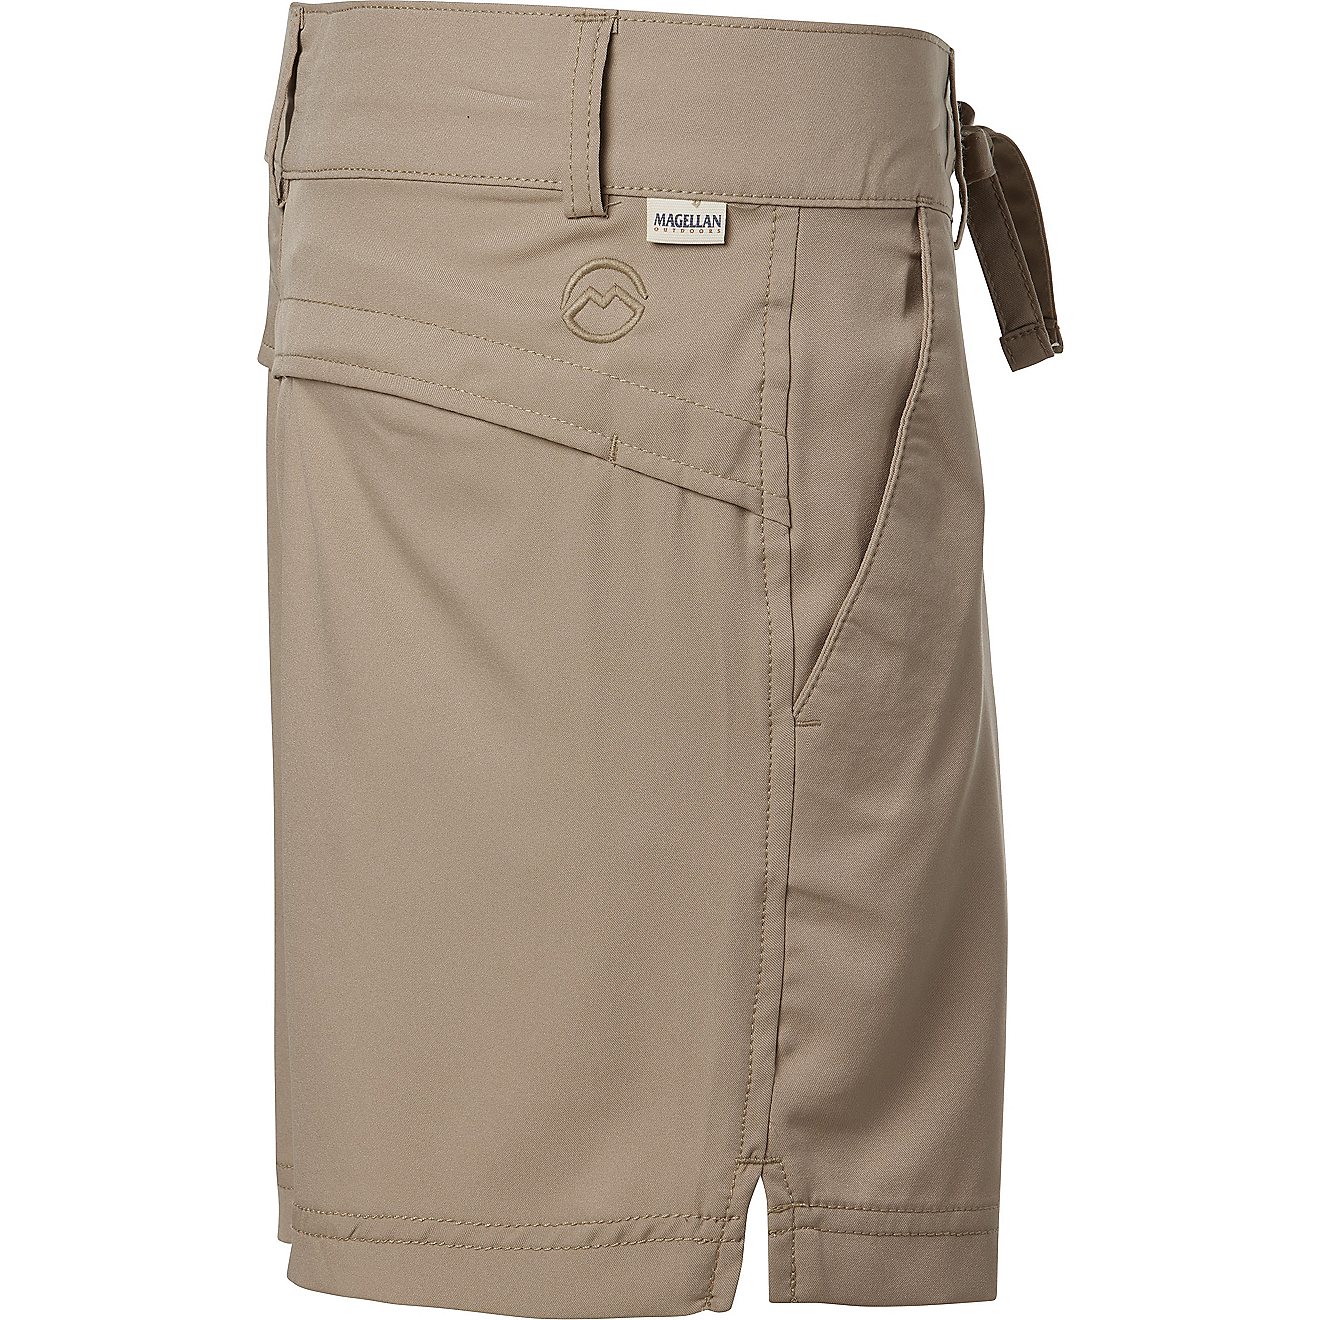 Magellan Outdoors Women's Falcon Lake Shorty Shorts 5 in                                                                         - view number 3